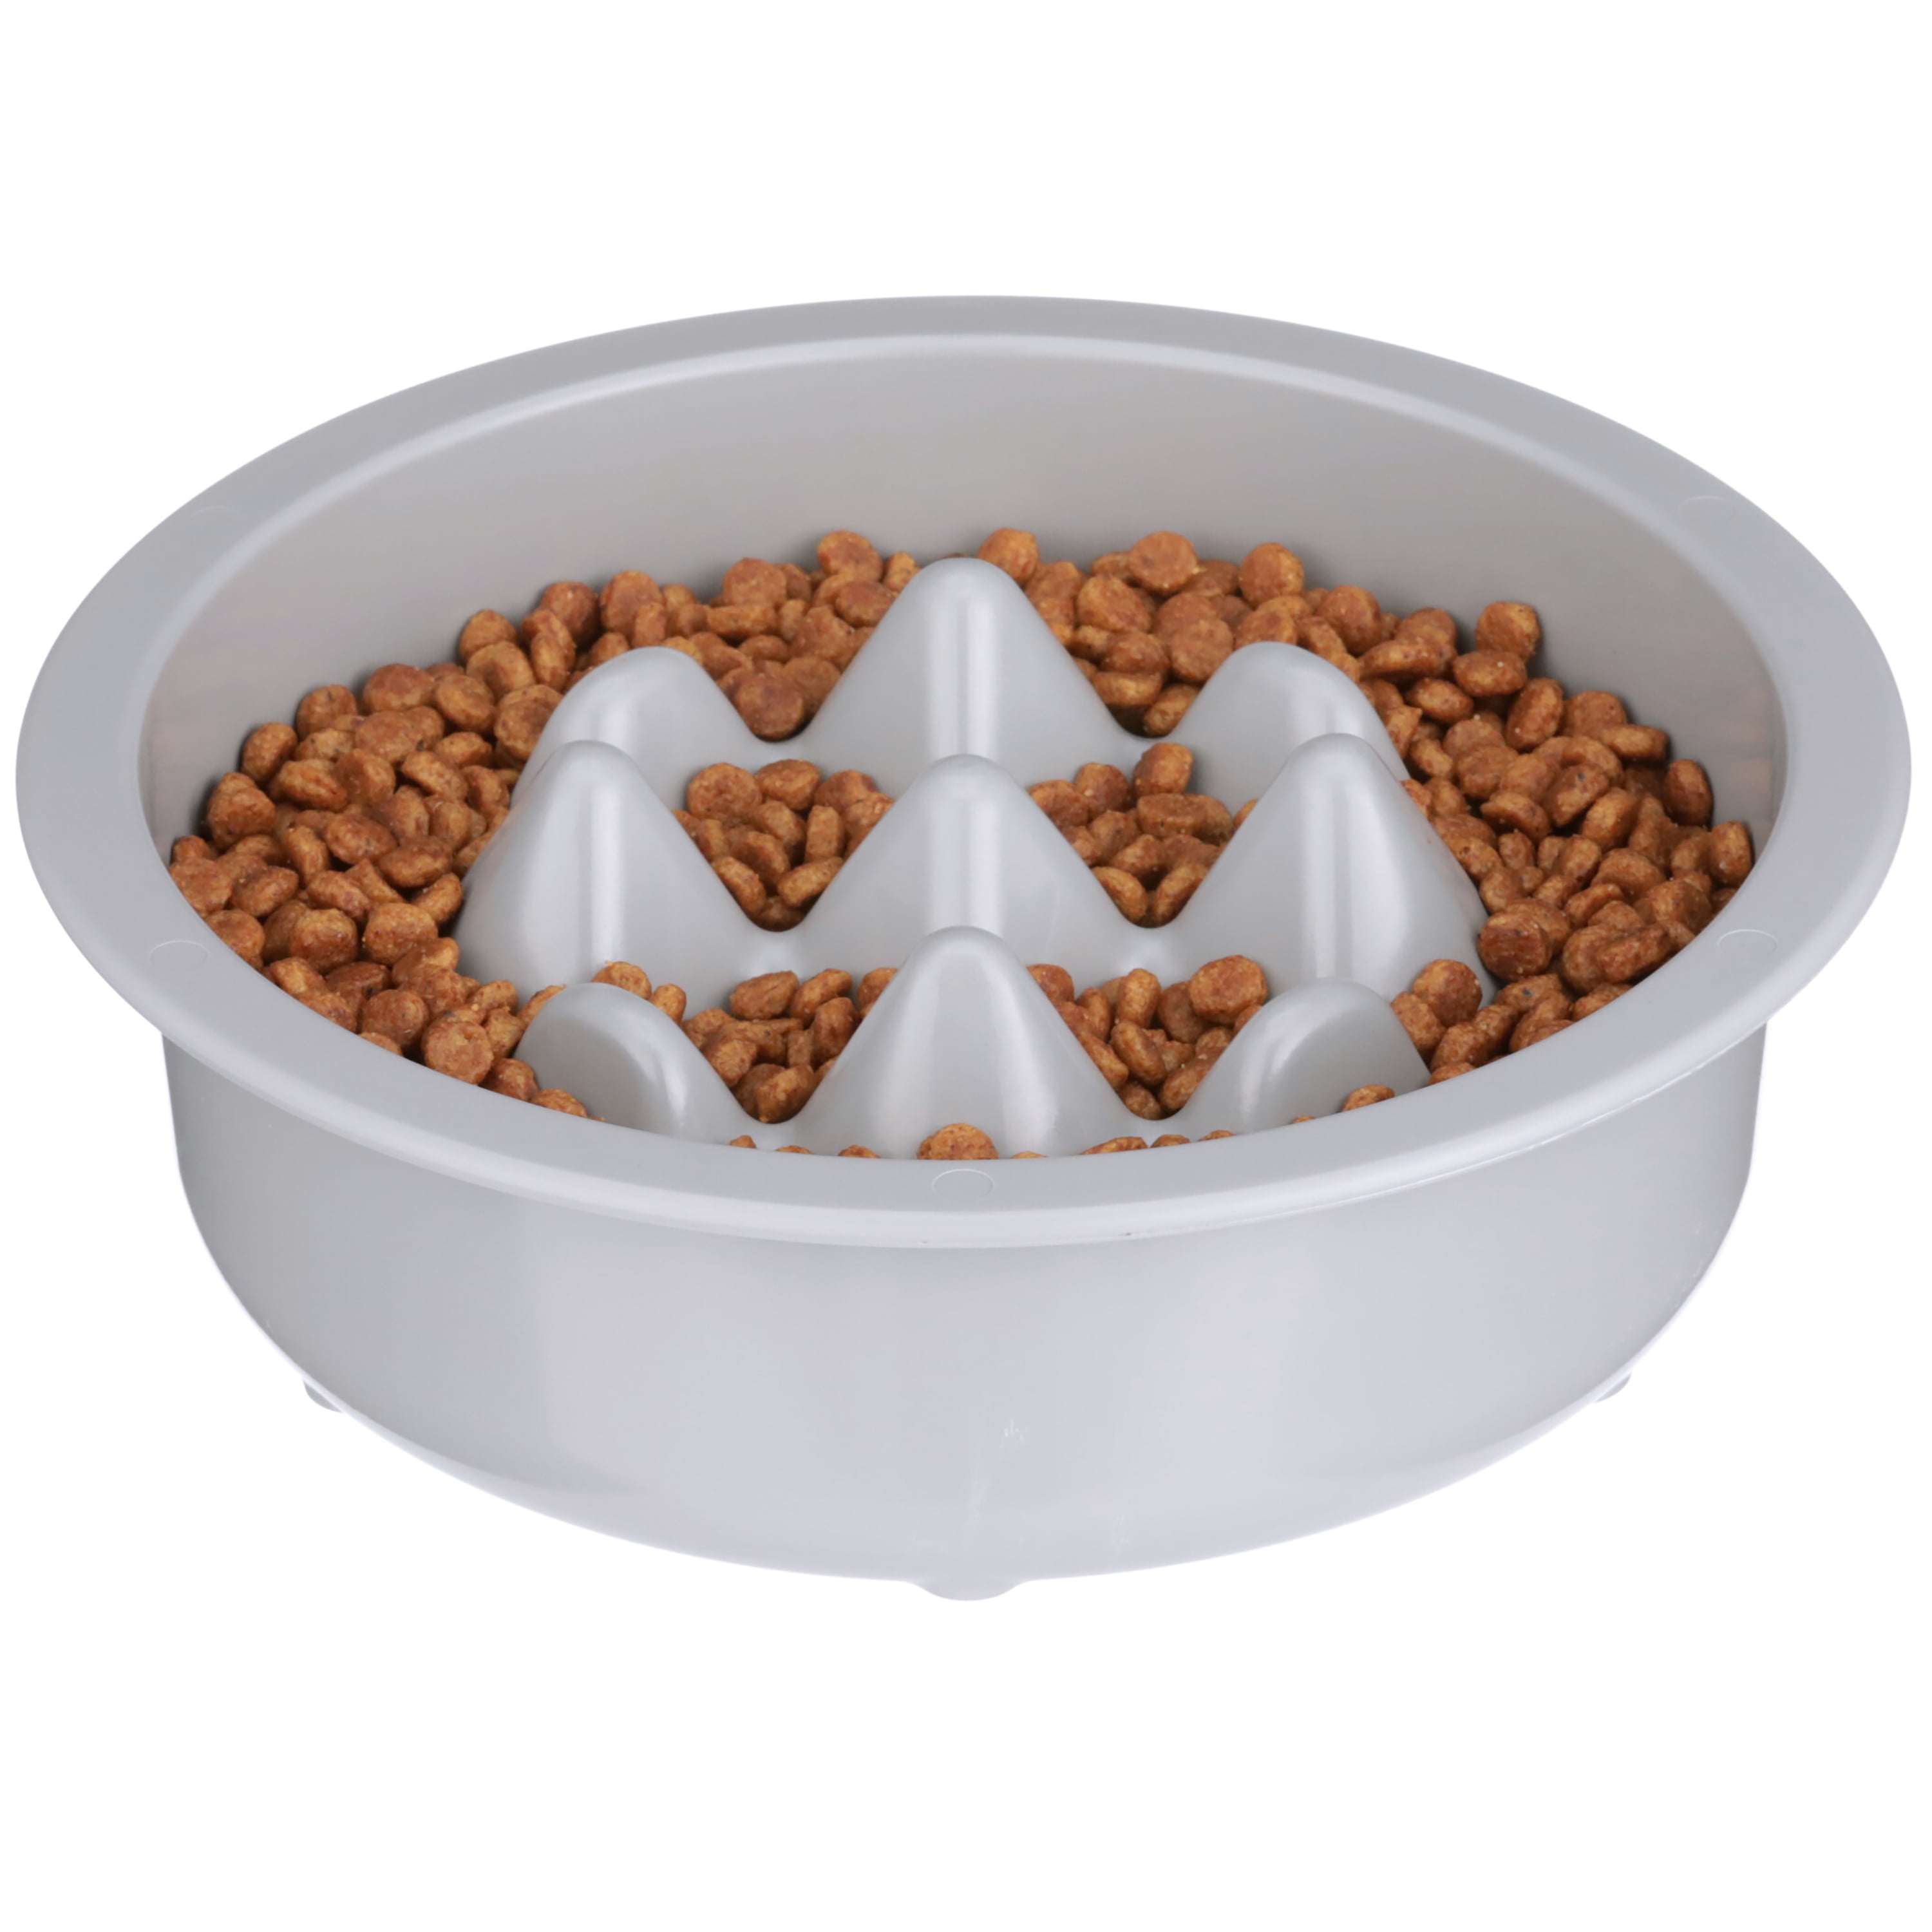 Leashboss Slow Feed Dog Bowl for Raised Pet Feeders - Maze Food Bowl Compatible with Elevated diners